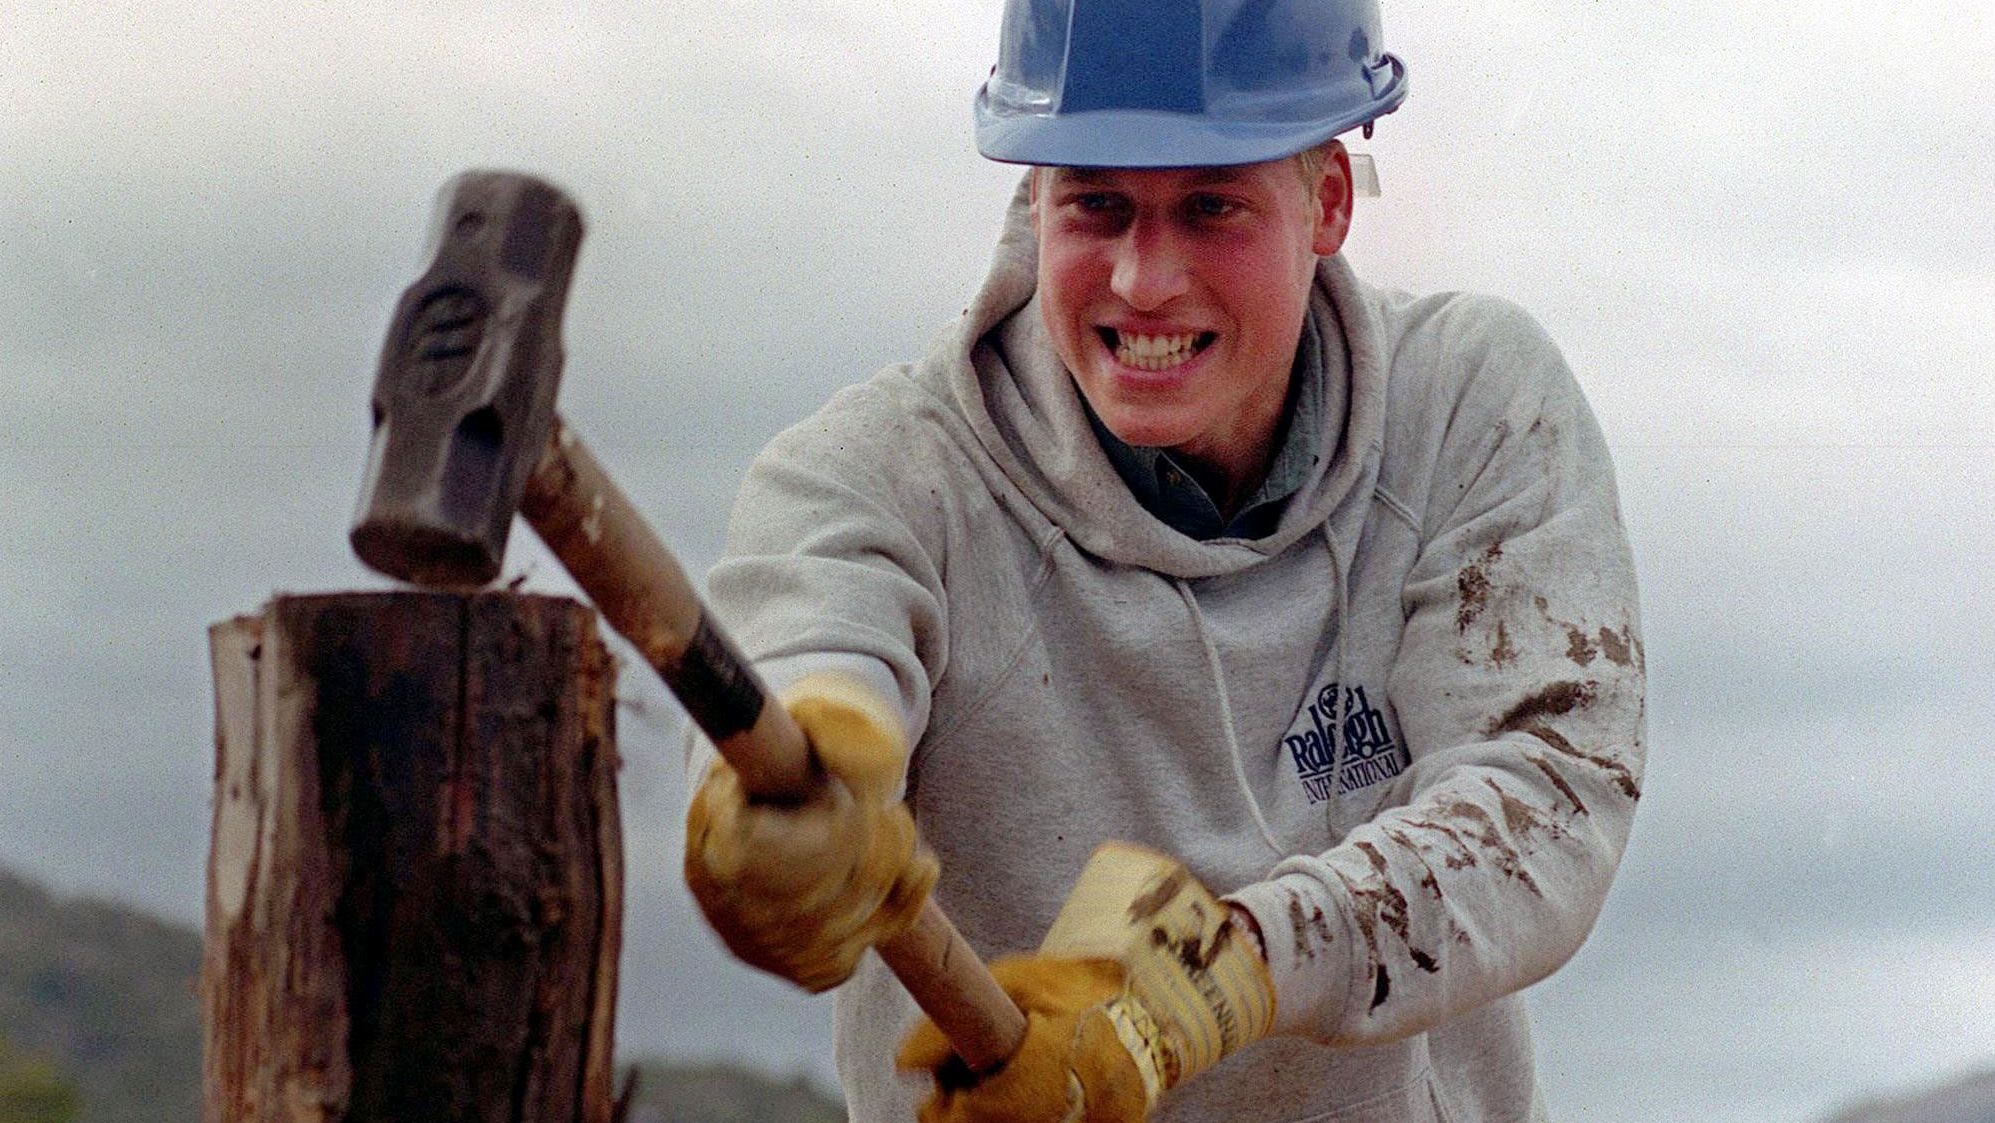 Prince William hammers a log while helping construct walkways in a remote village in Chile in 2000.